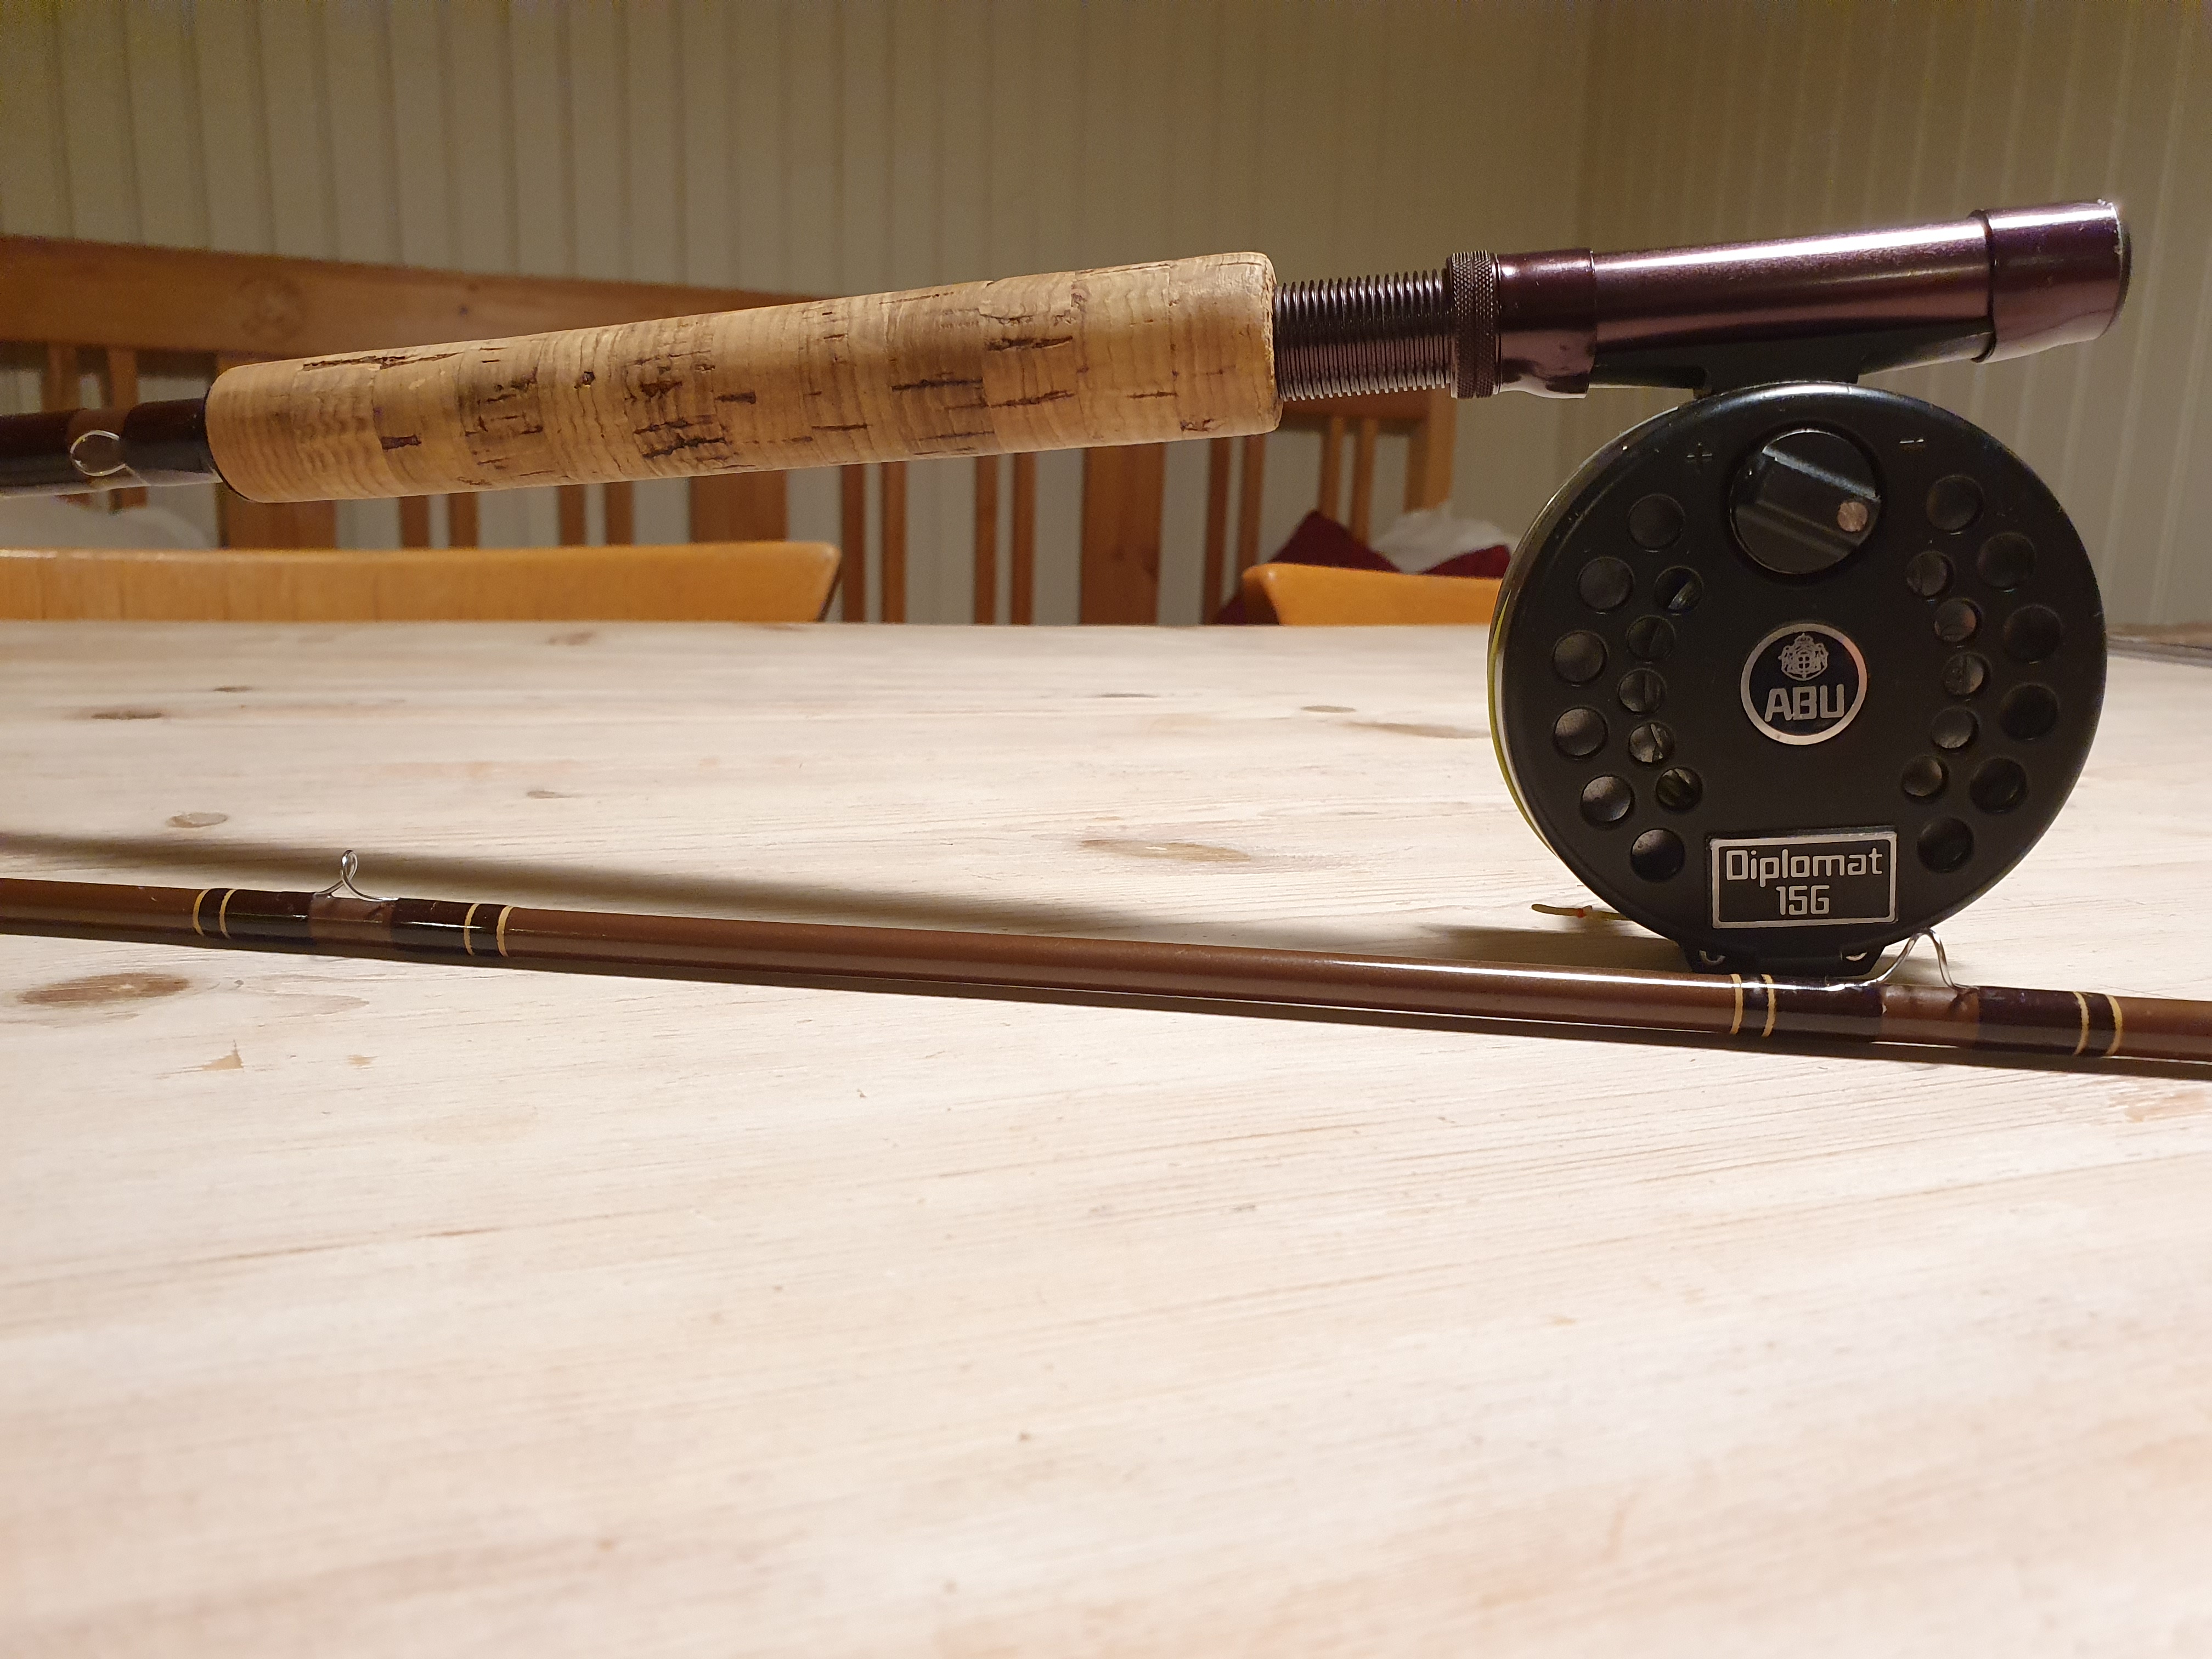 Abu Citation 567 made in USA, Collecting Fiberglass Fly Rods